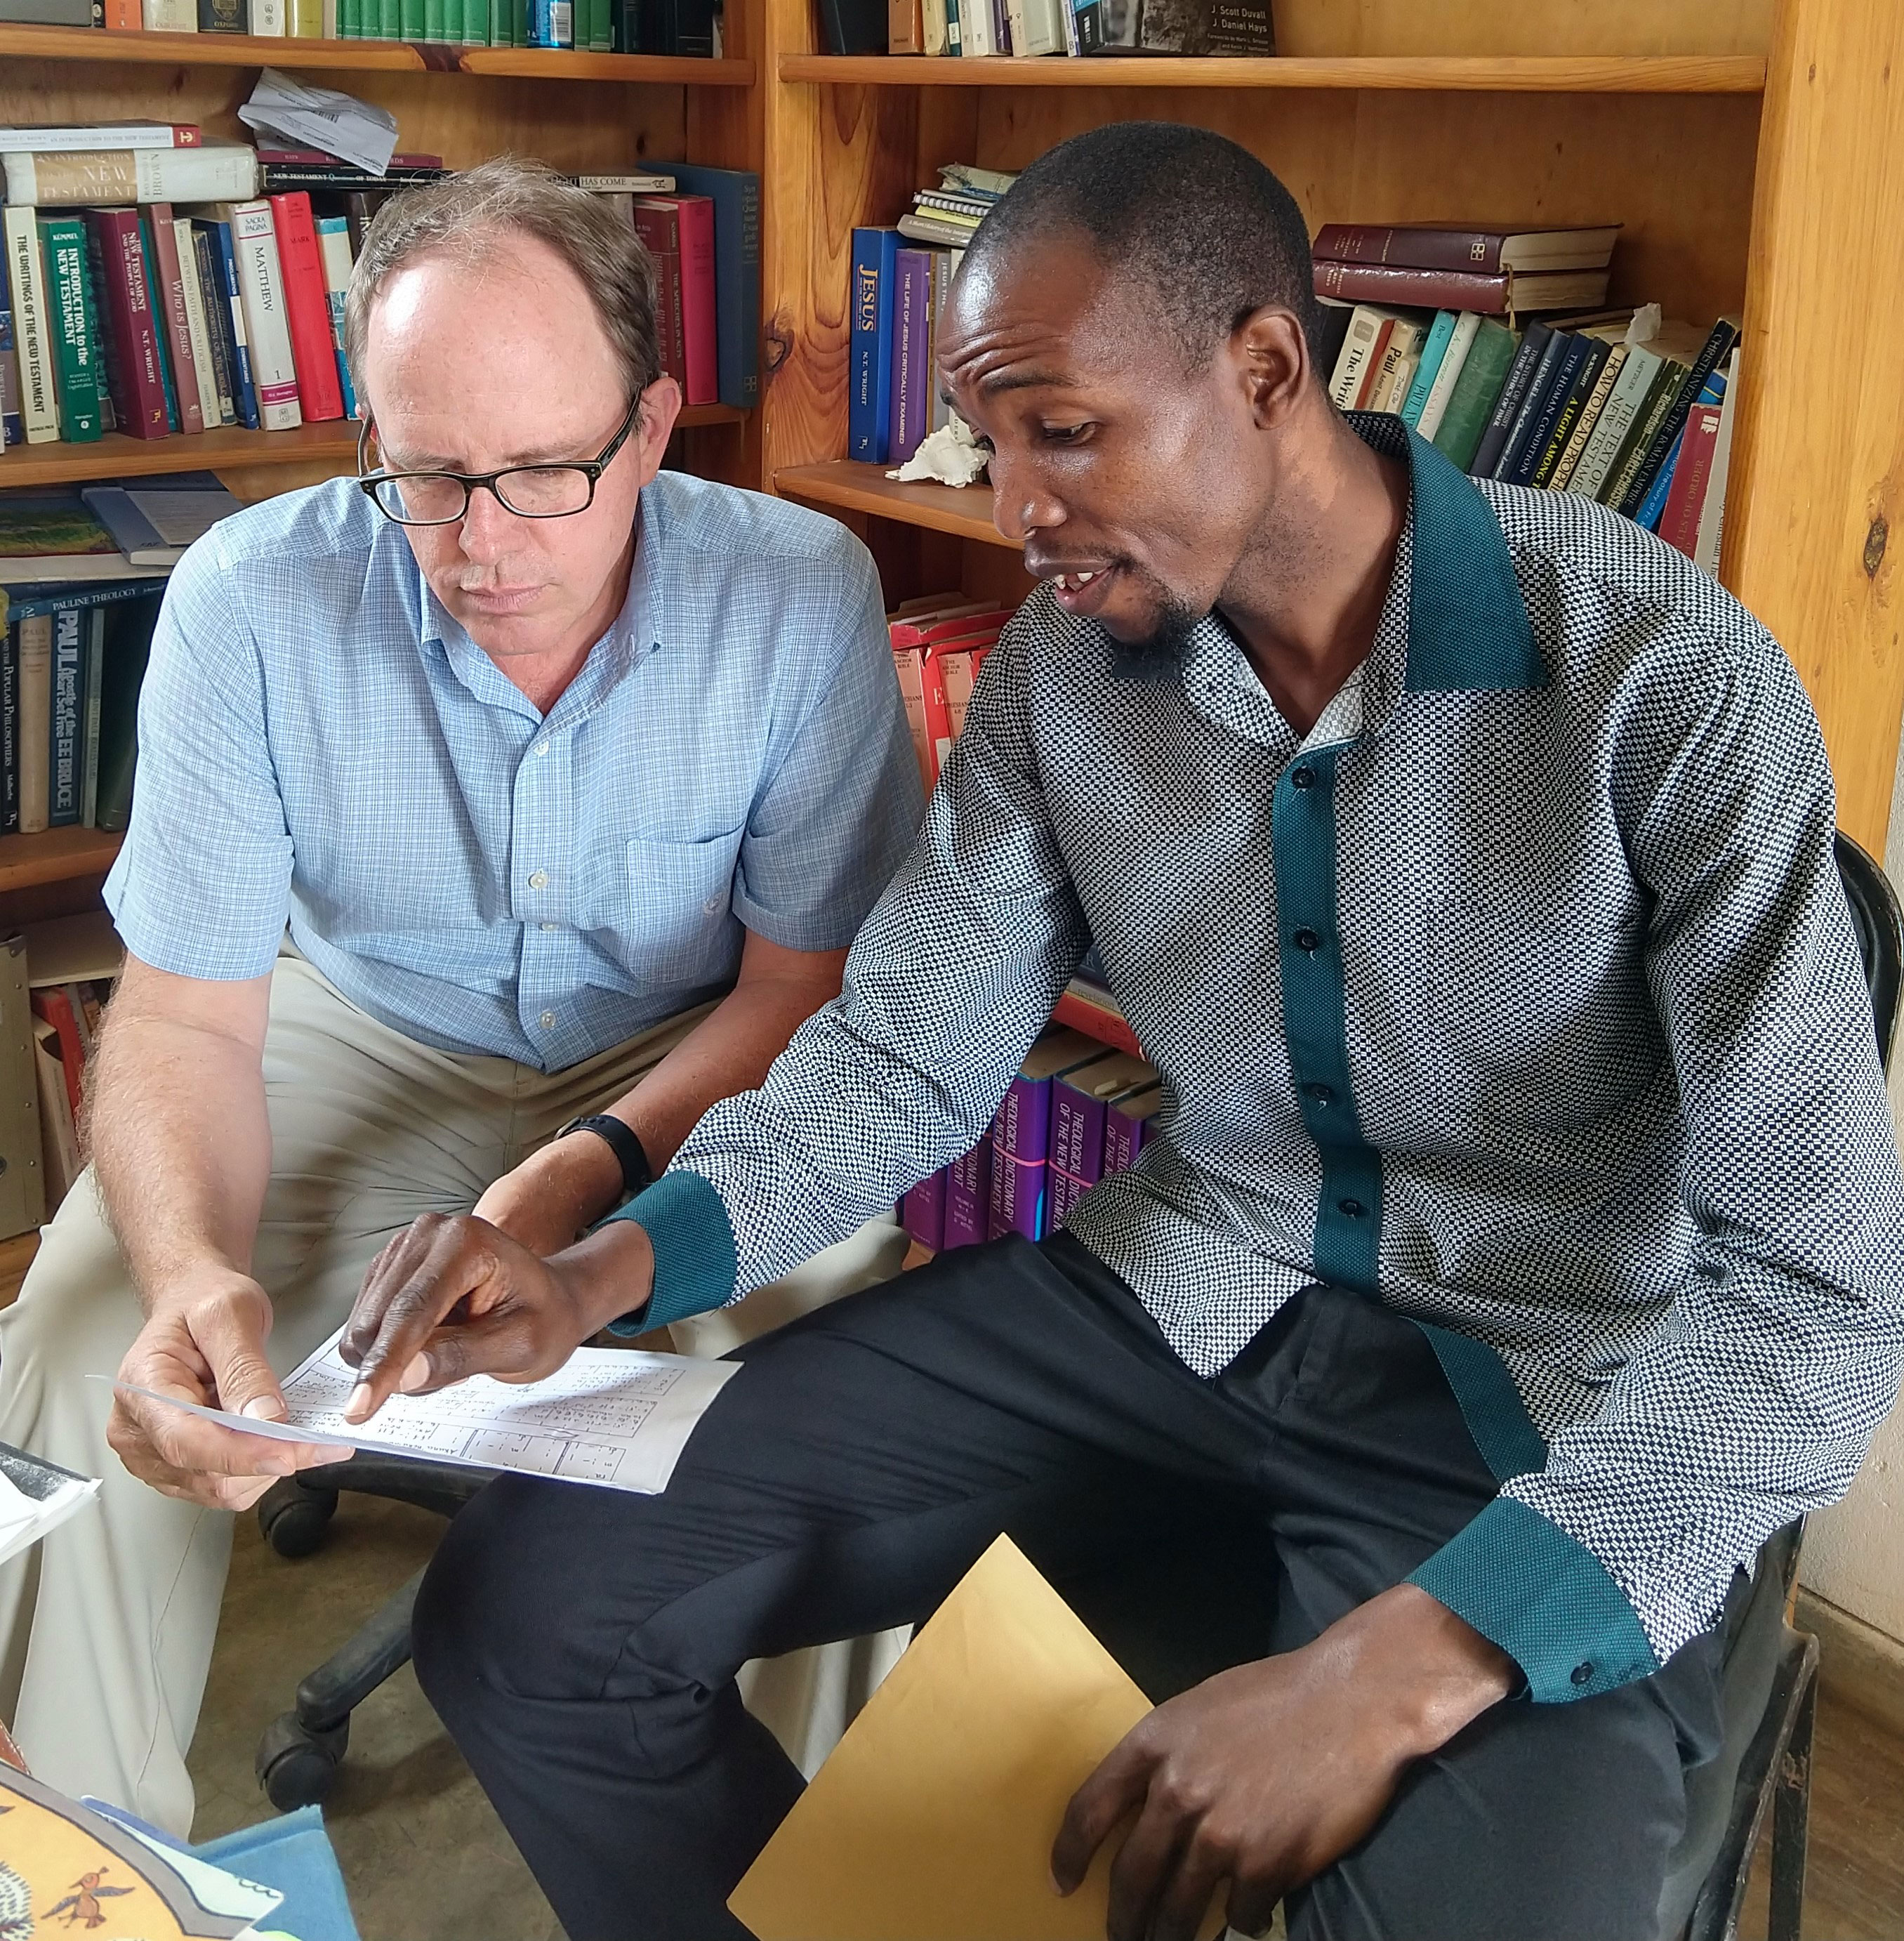 Dustin meeting with a student, Jose Bazima, in Dustin’s office at Justo Mwale University